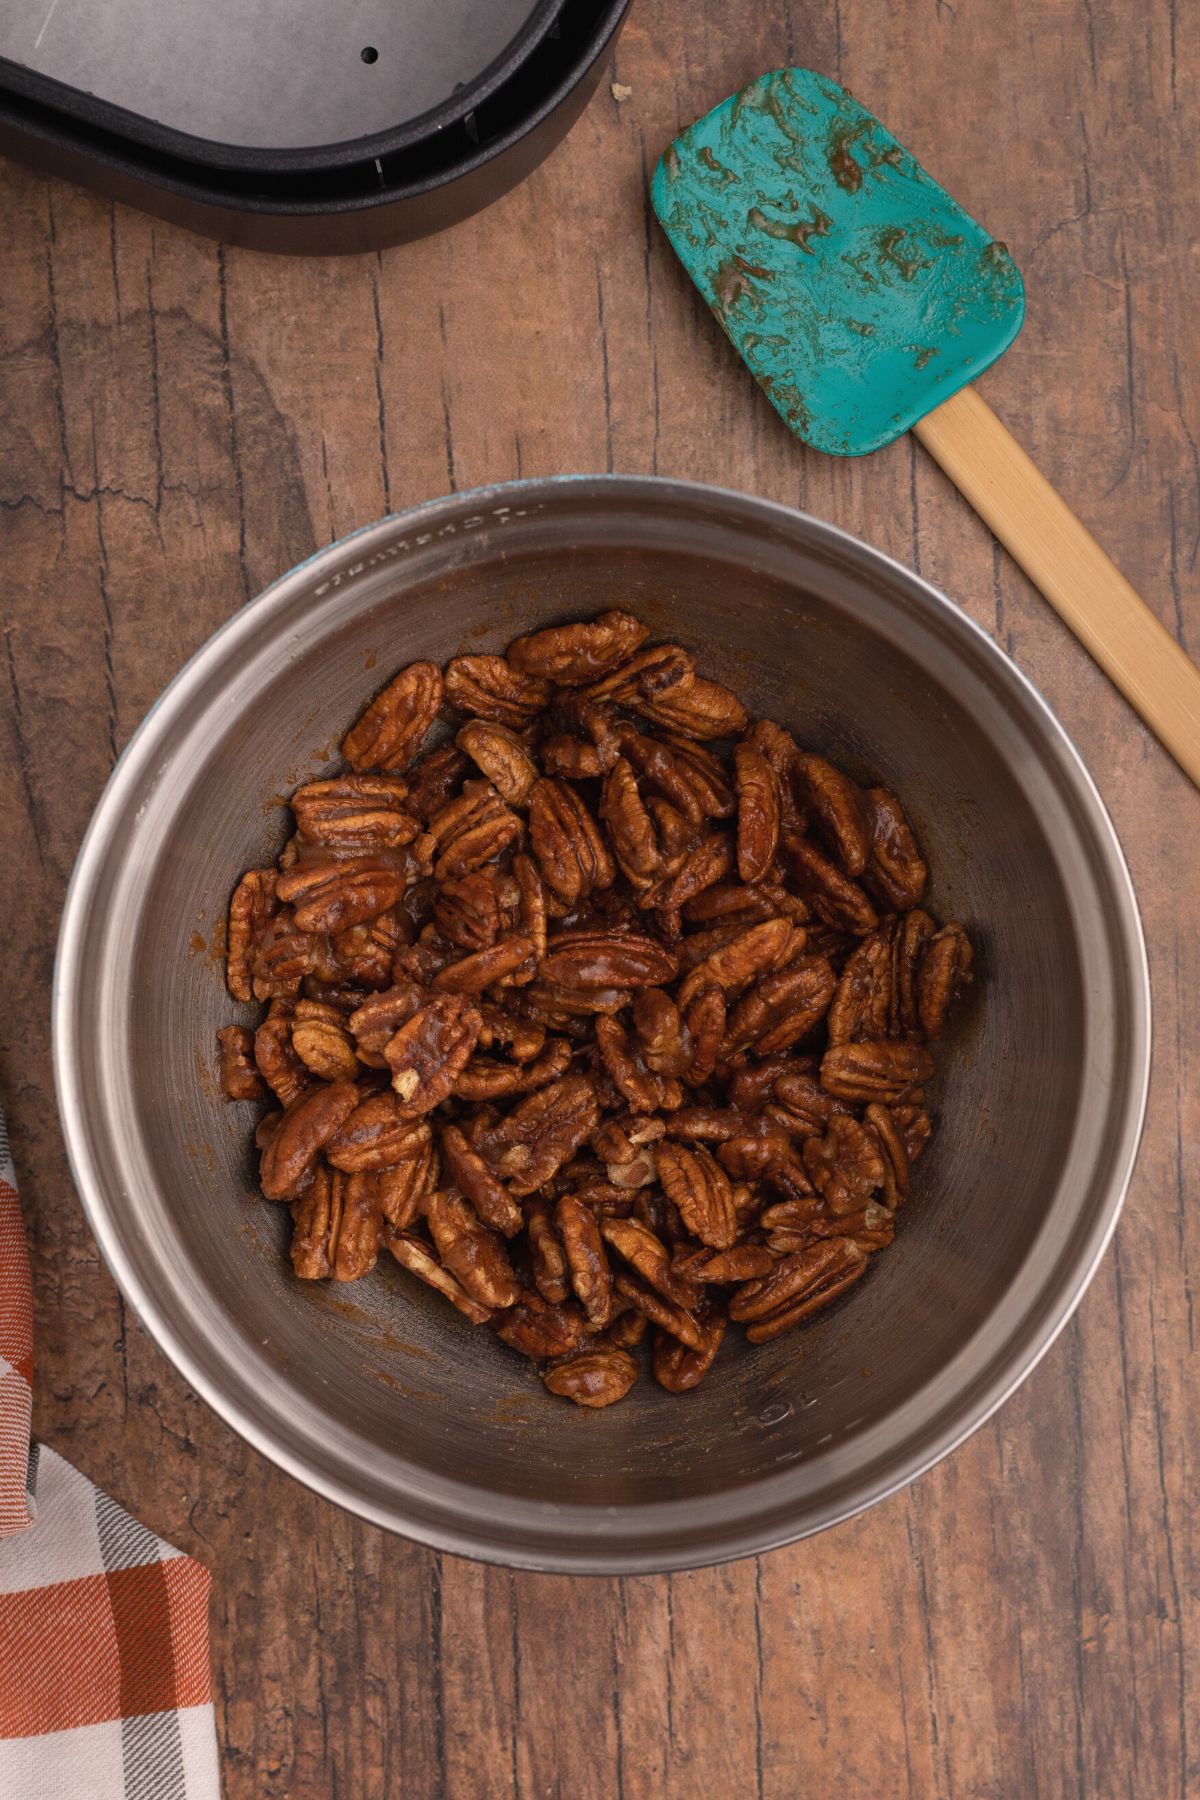 All ingredients mixed together coating pecans in a bowl before being put in the air fryer basket